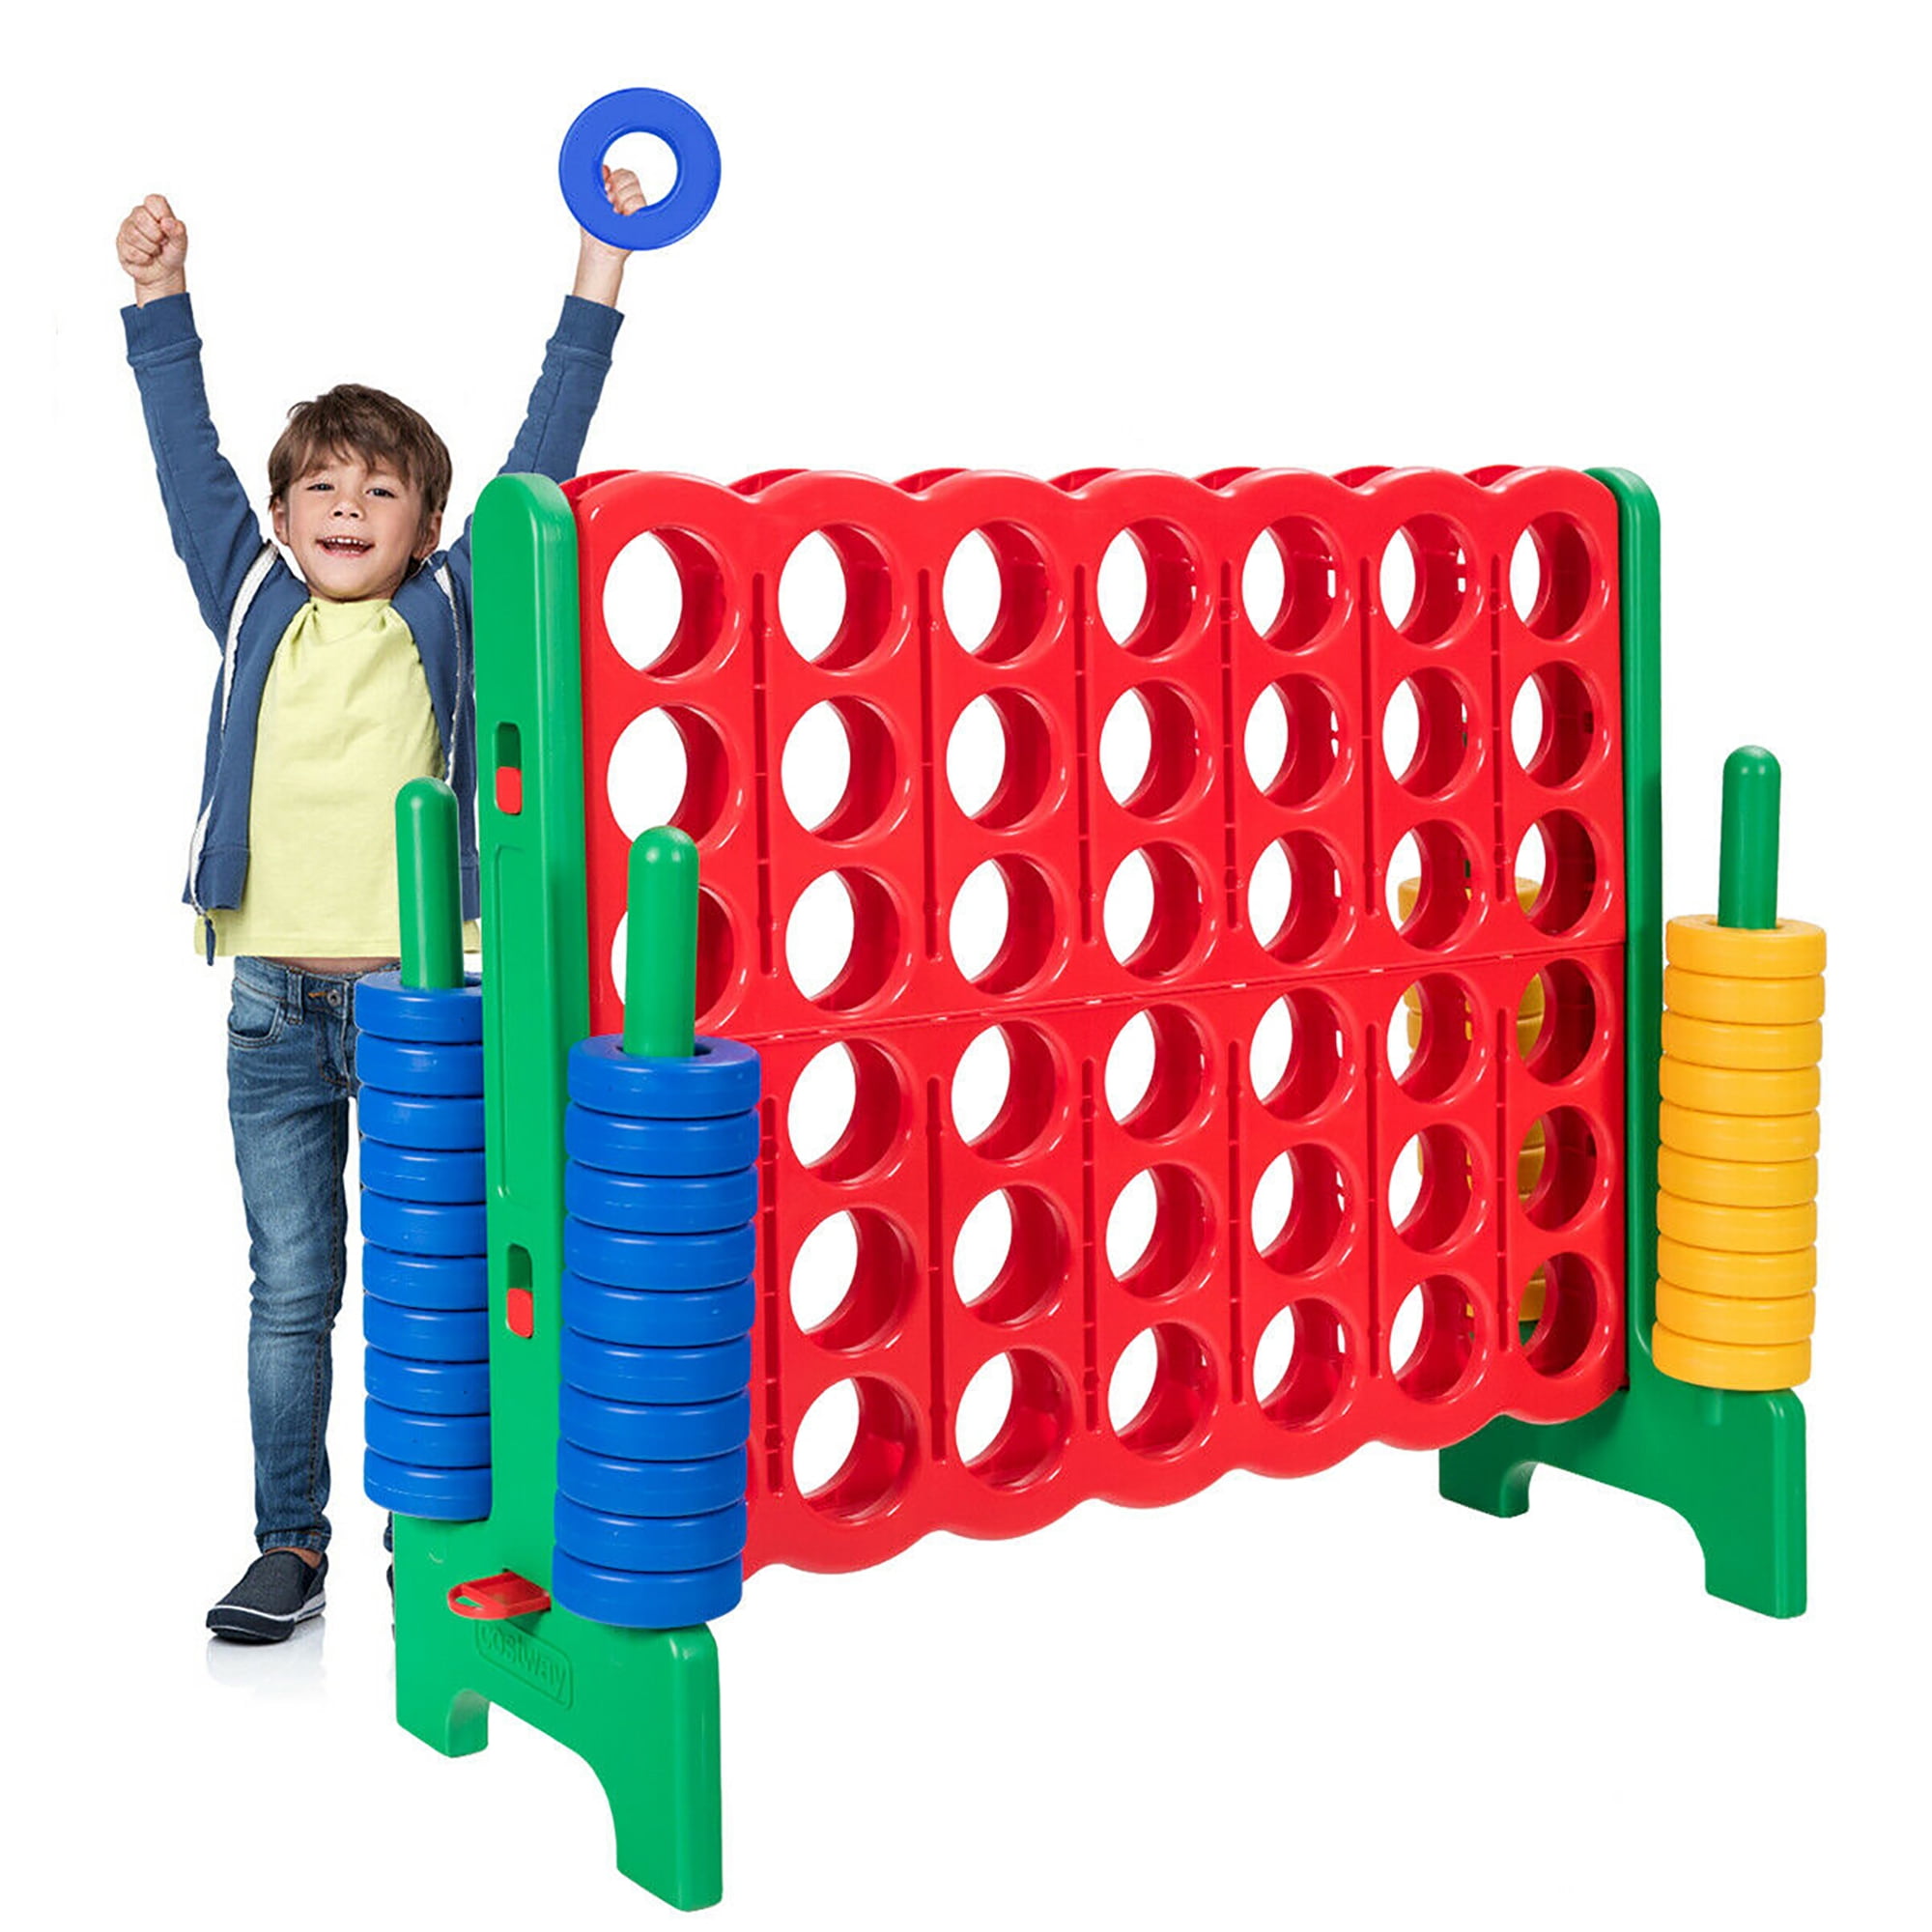 Details about   4FT Kids Jumbo 4-to-Score Giant Game Connect-All-4 Game Set Fun Indoor Dark Blue 